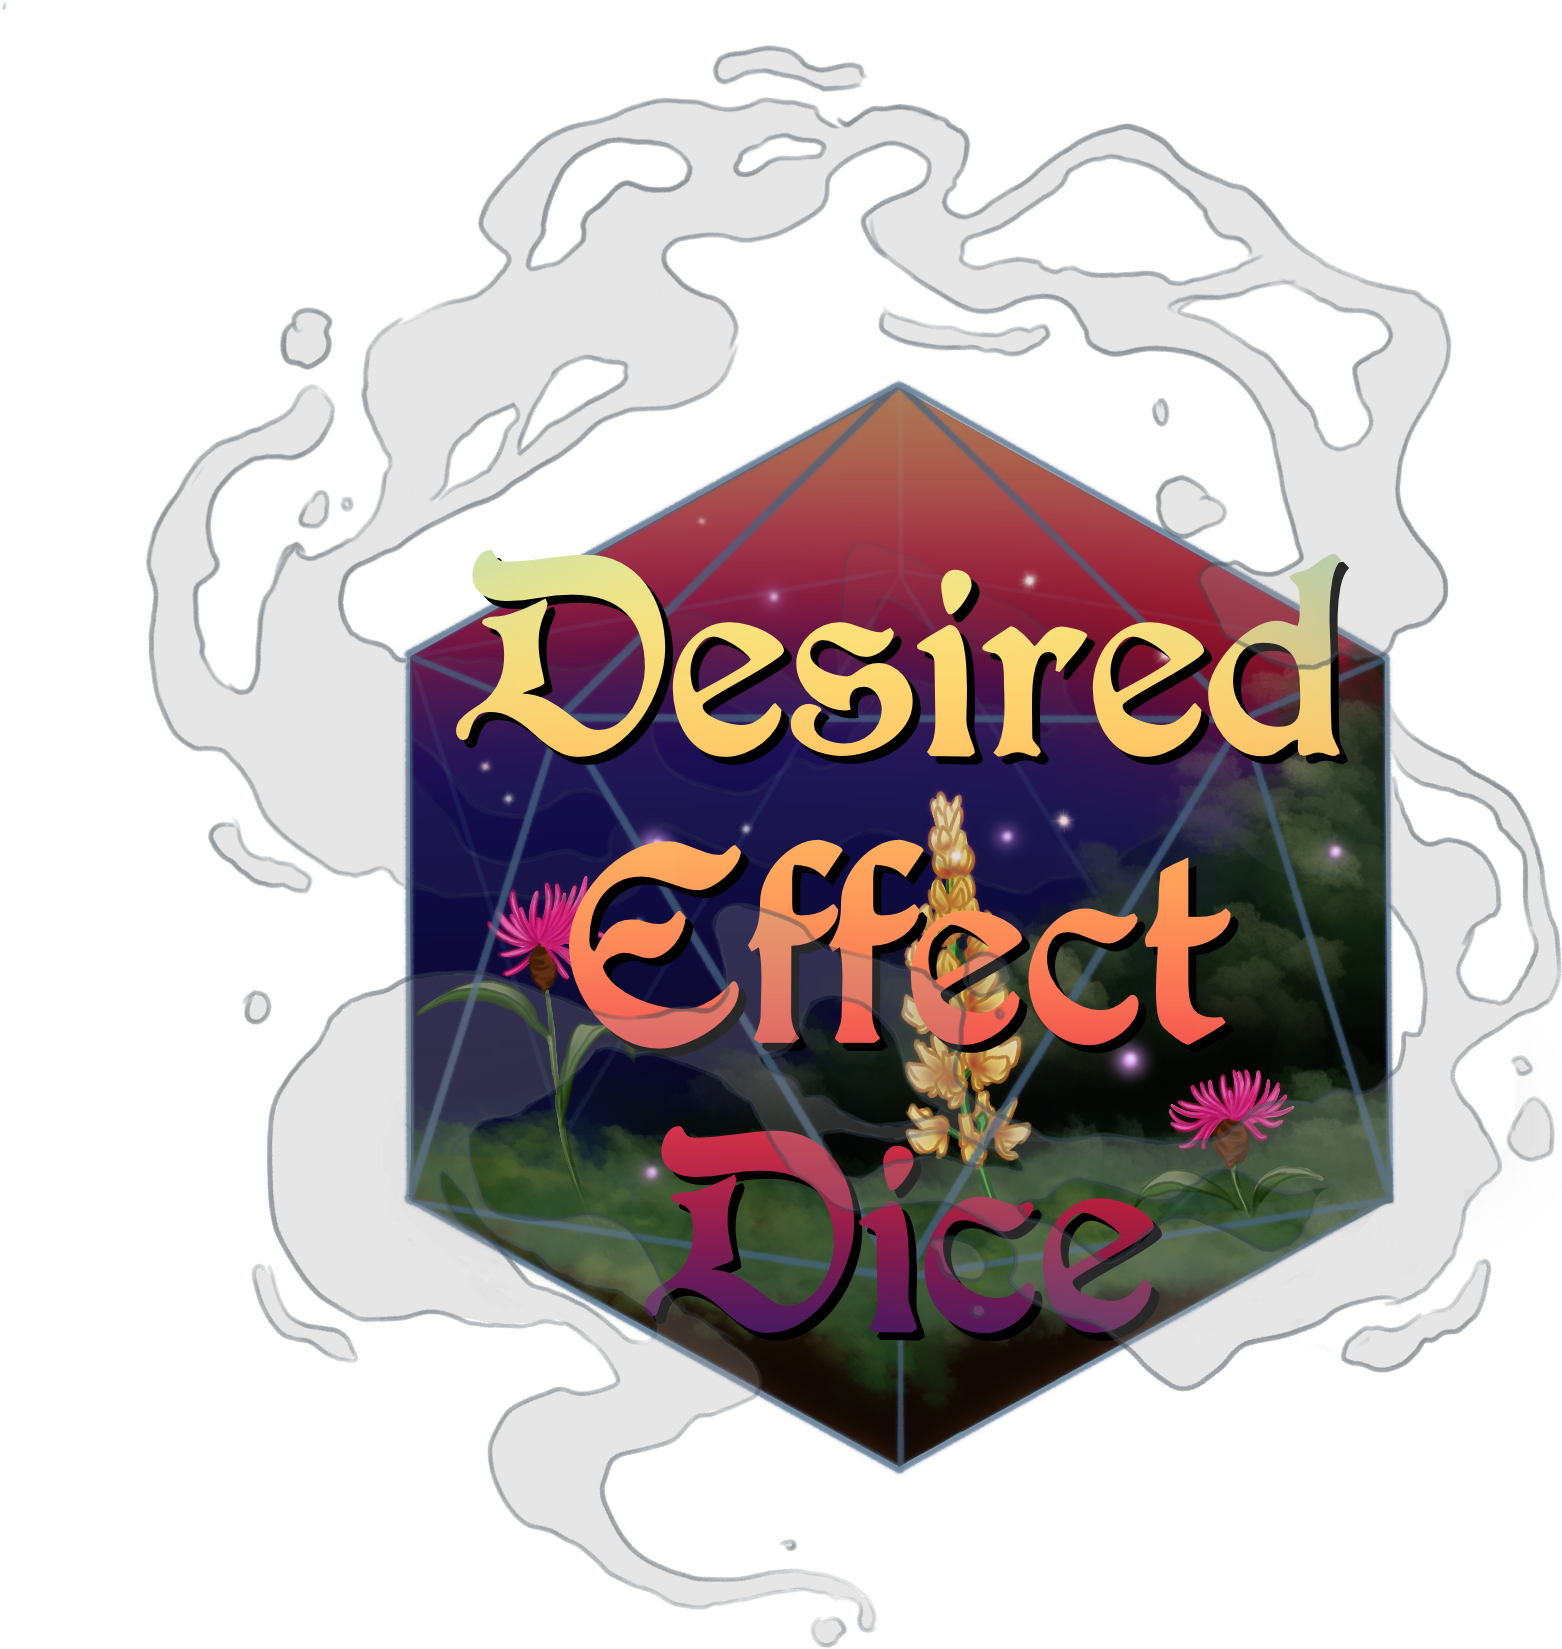 Desired Effect Dice